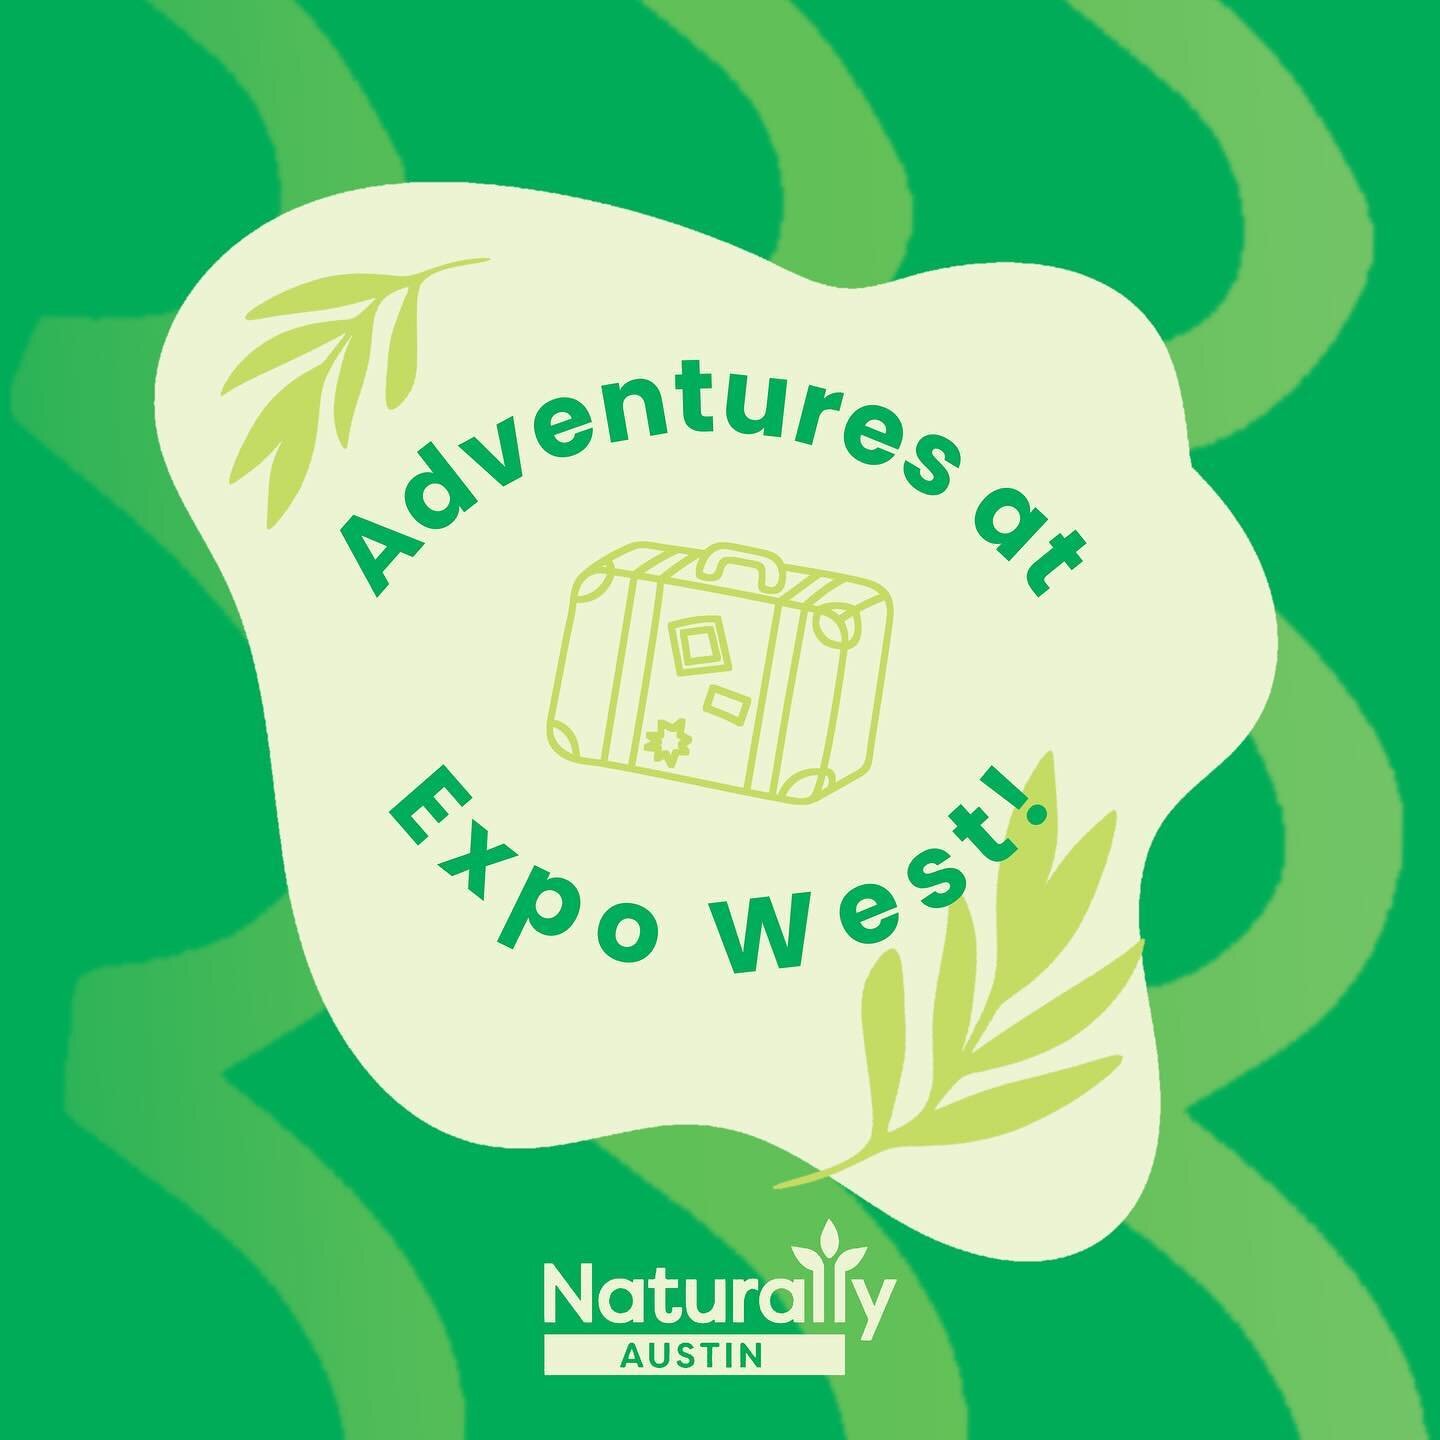 🌿 Finally, we have returned from Expo West&mdash;and it was an amazing one!

Getting to see some of our members at booths was such a treat! We got to meet a ton of new folks, learn more about these amazing brands who are making a huge difference in 